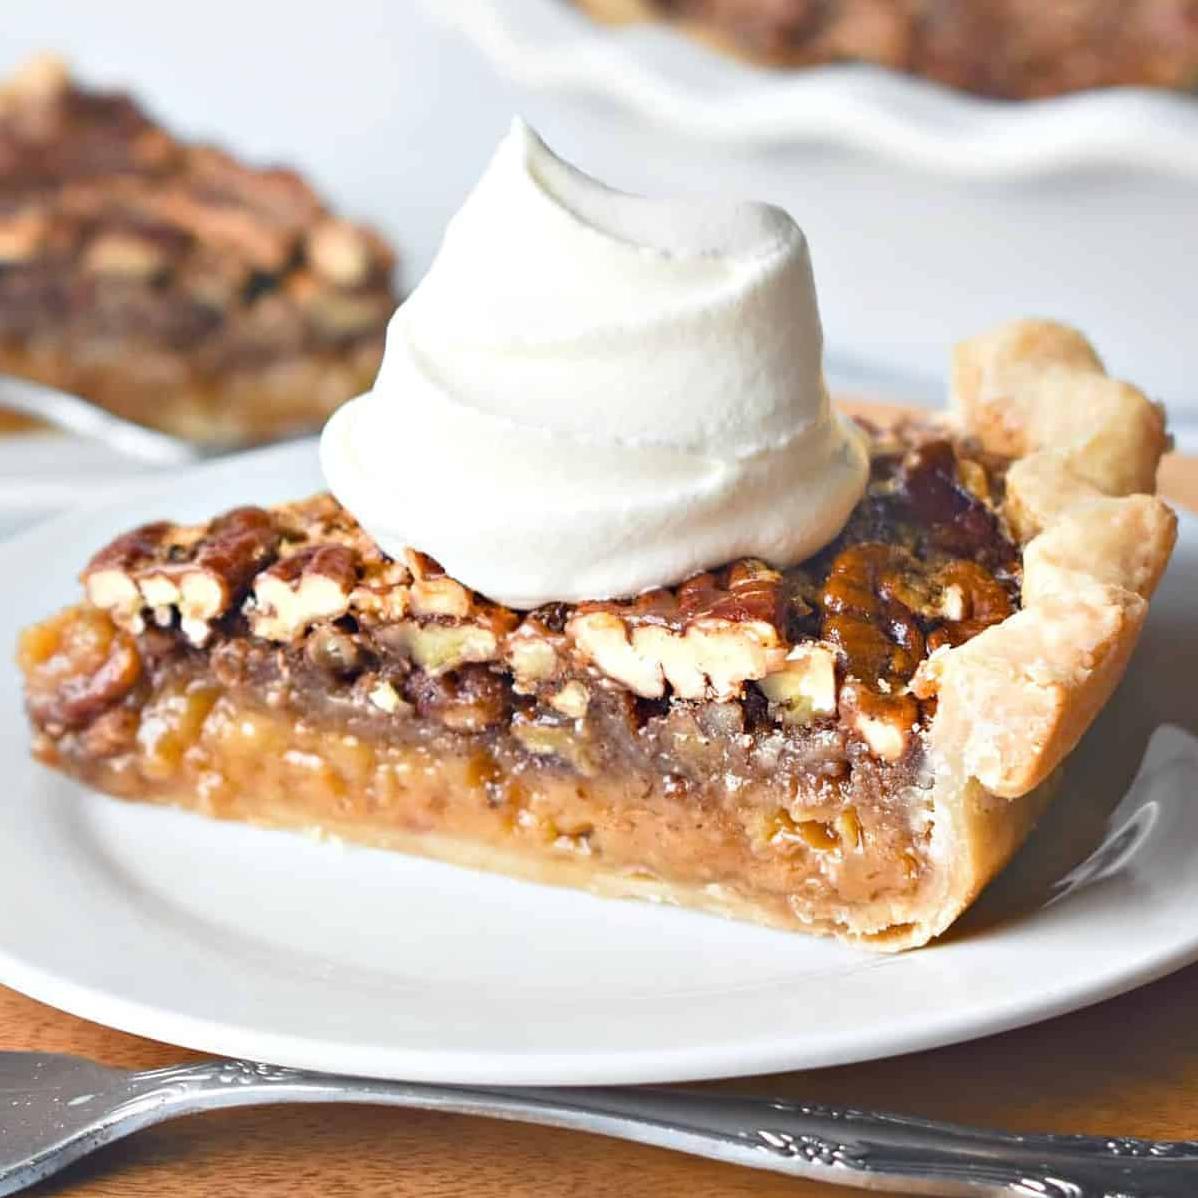  This pie is so tempting that you won't be able to resist a second slice!